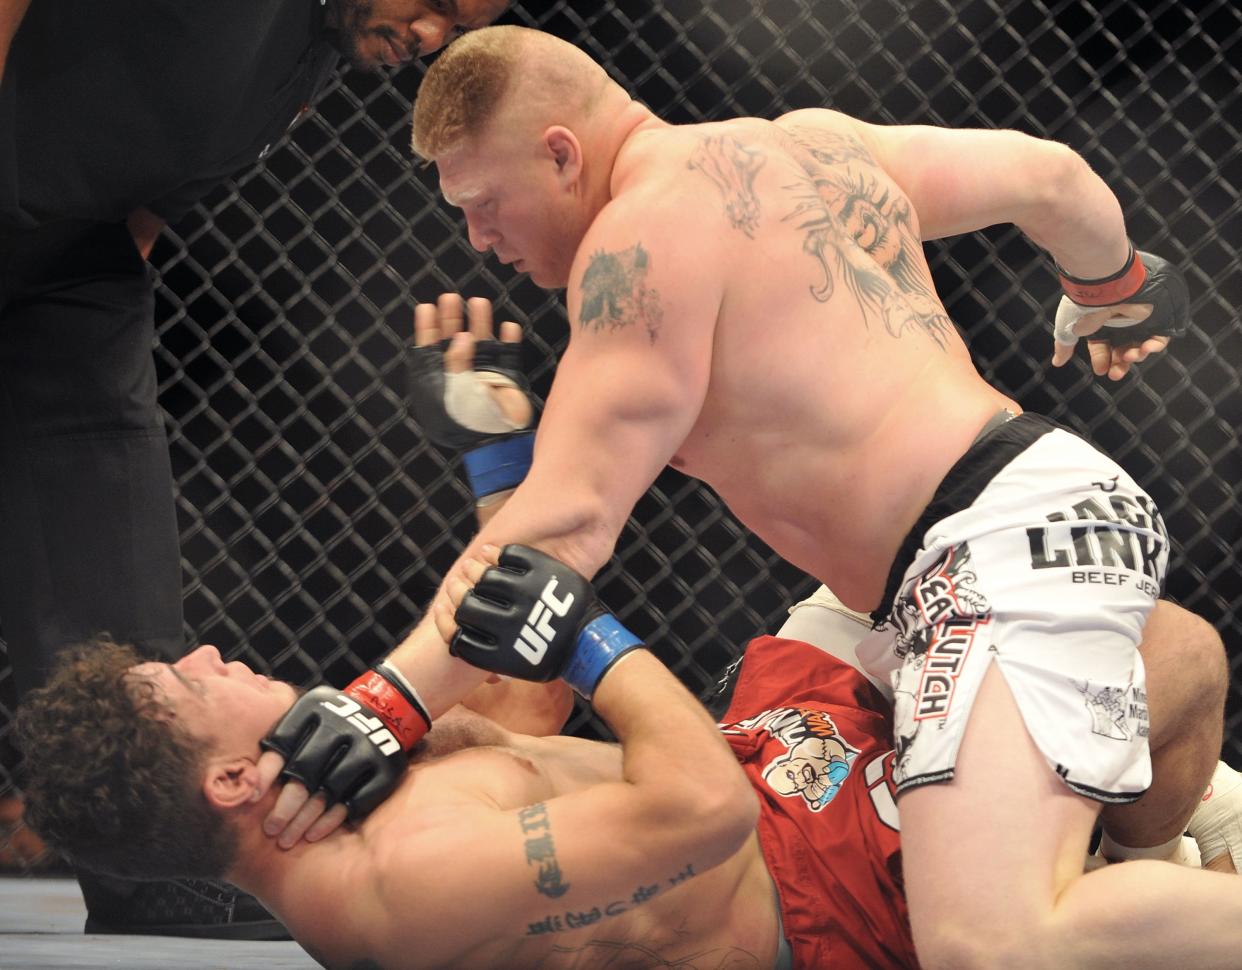 LAS VEGAS - JULY 11:  UFC heavyweights Brock Lesnar (R) battles Frank Mir (L) during their heavyweight title bout during UFC 100 the Mandalay Bay Hotel and Casino on July 11, 2009 in Las Vegas, Nevada.  (Photo by Jon Kopaloff/Getty Images)